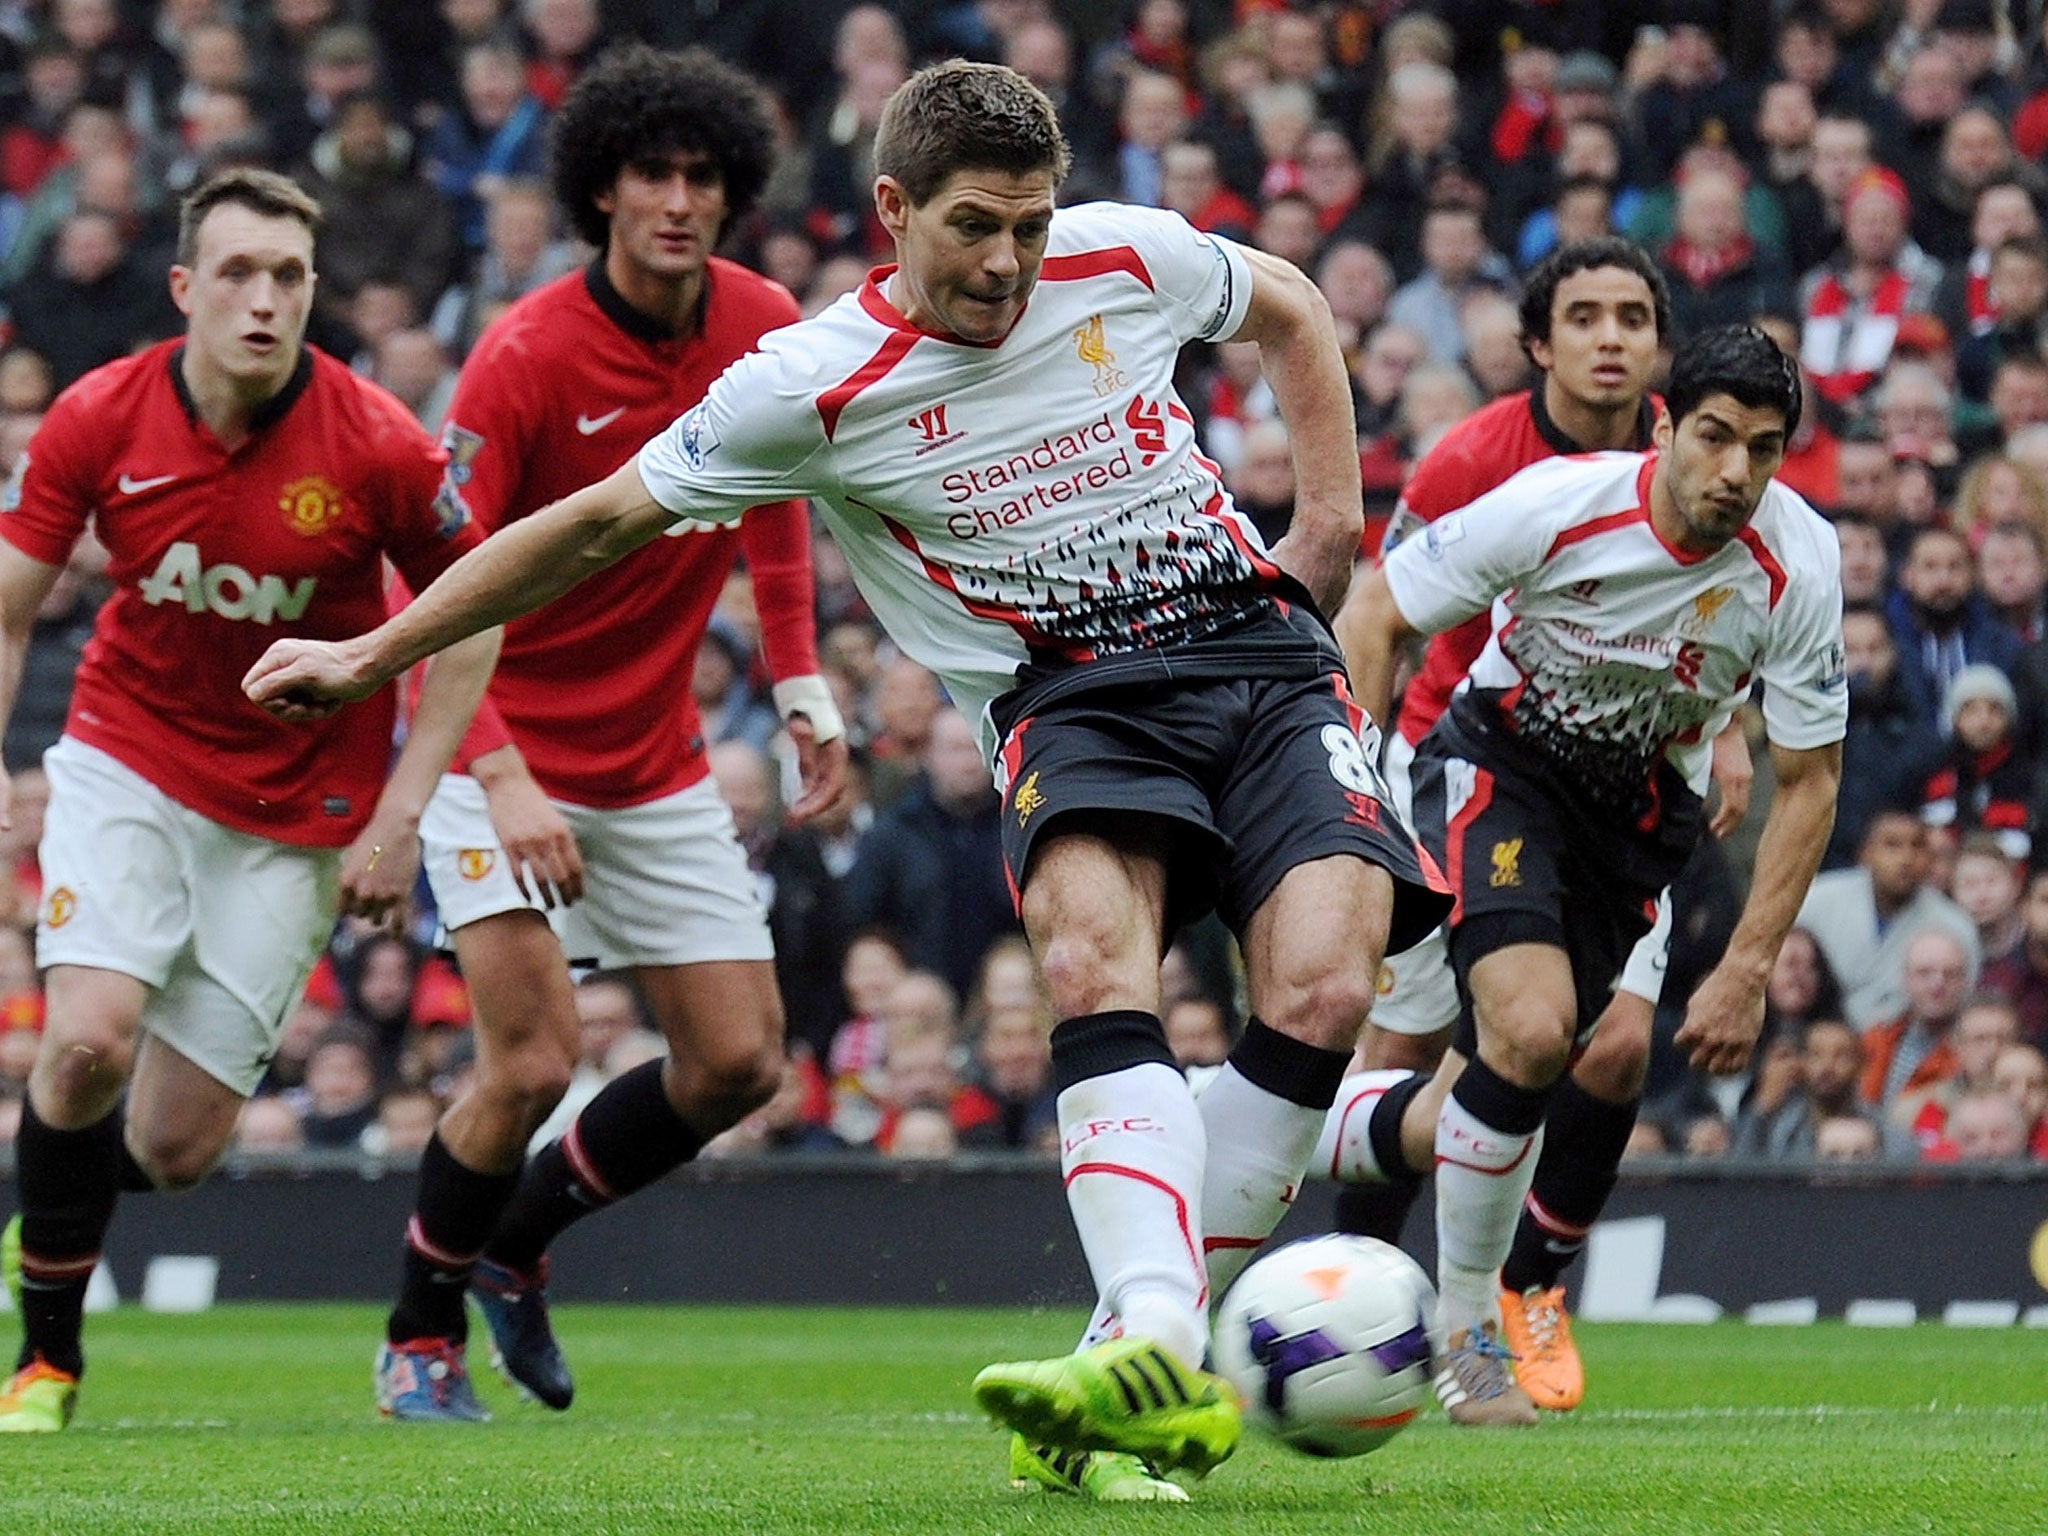 Steven Gerrard scores his first penalty of the game